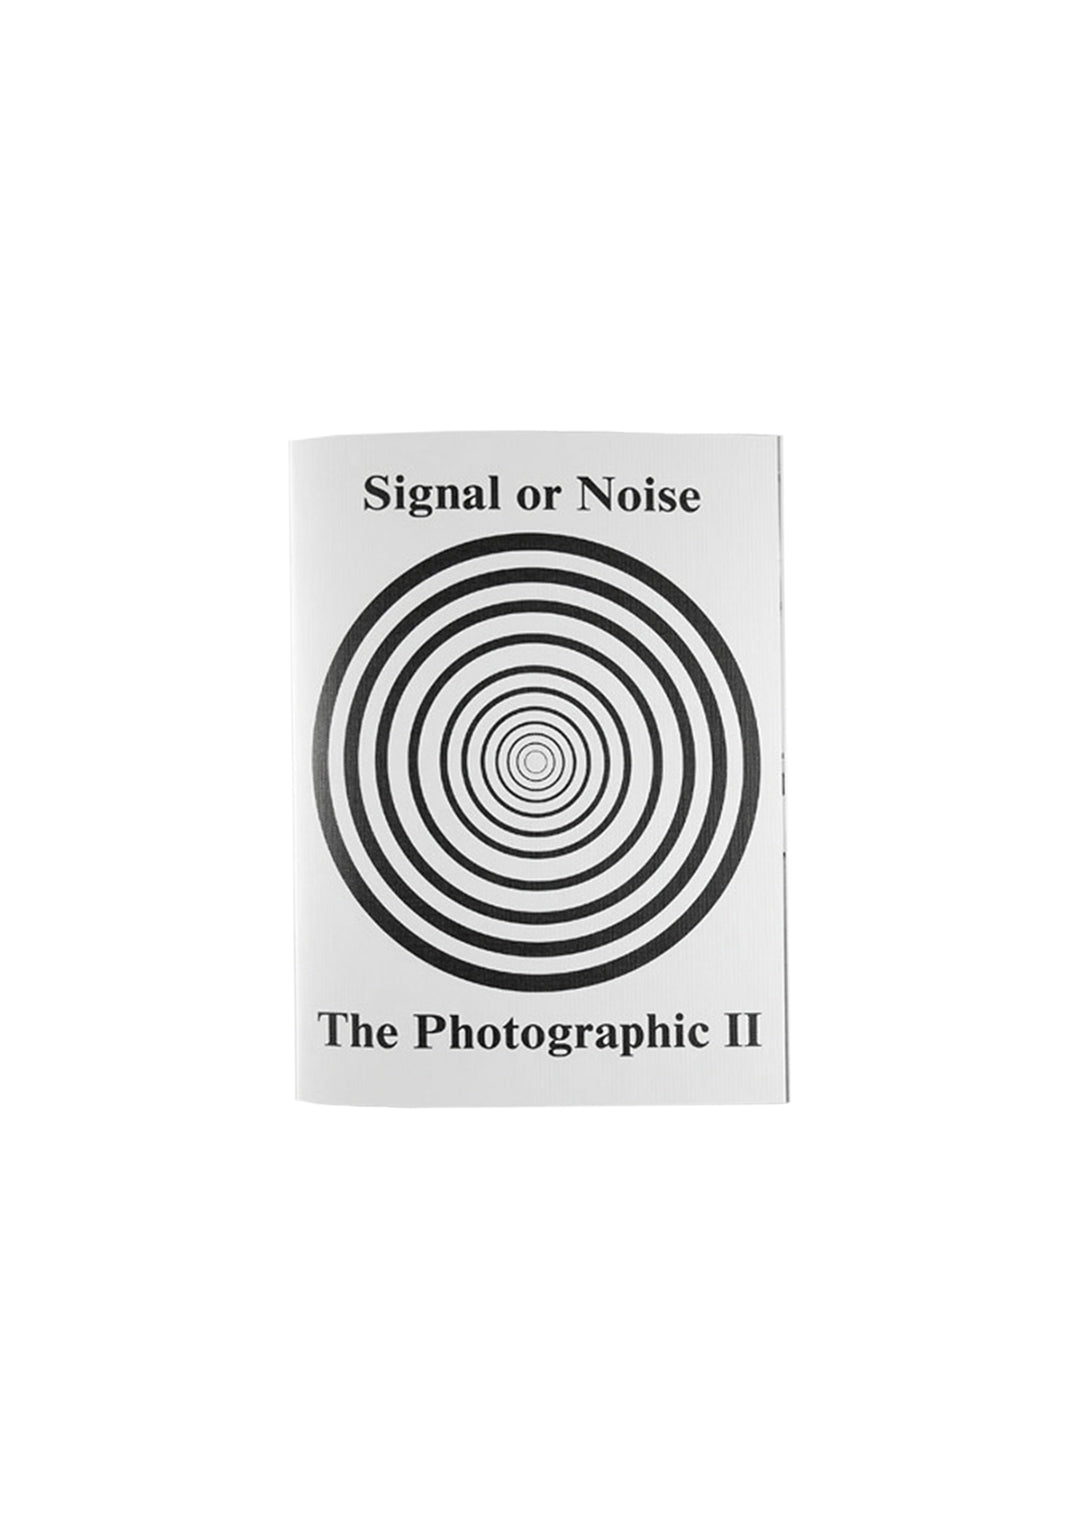 The Photographic II: Signal or Noise